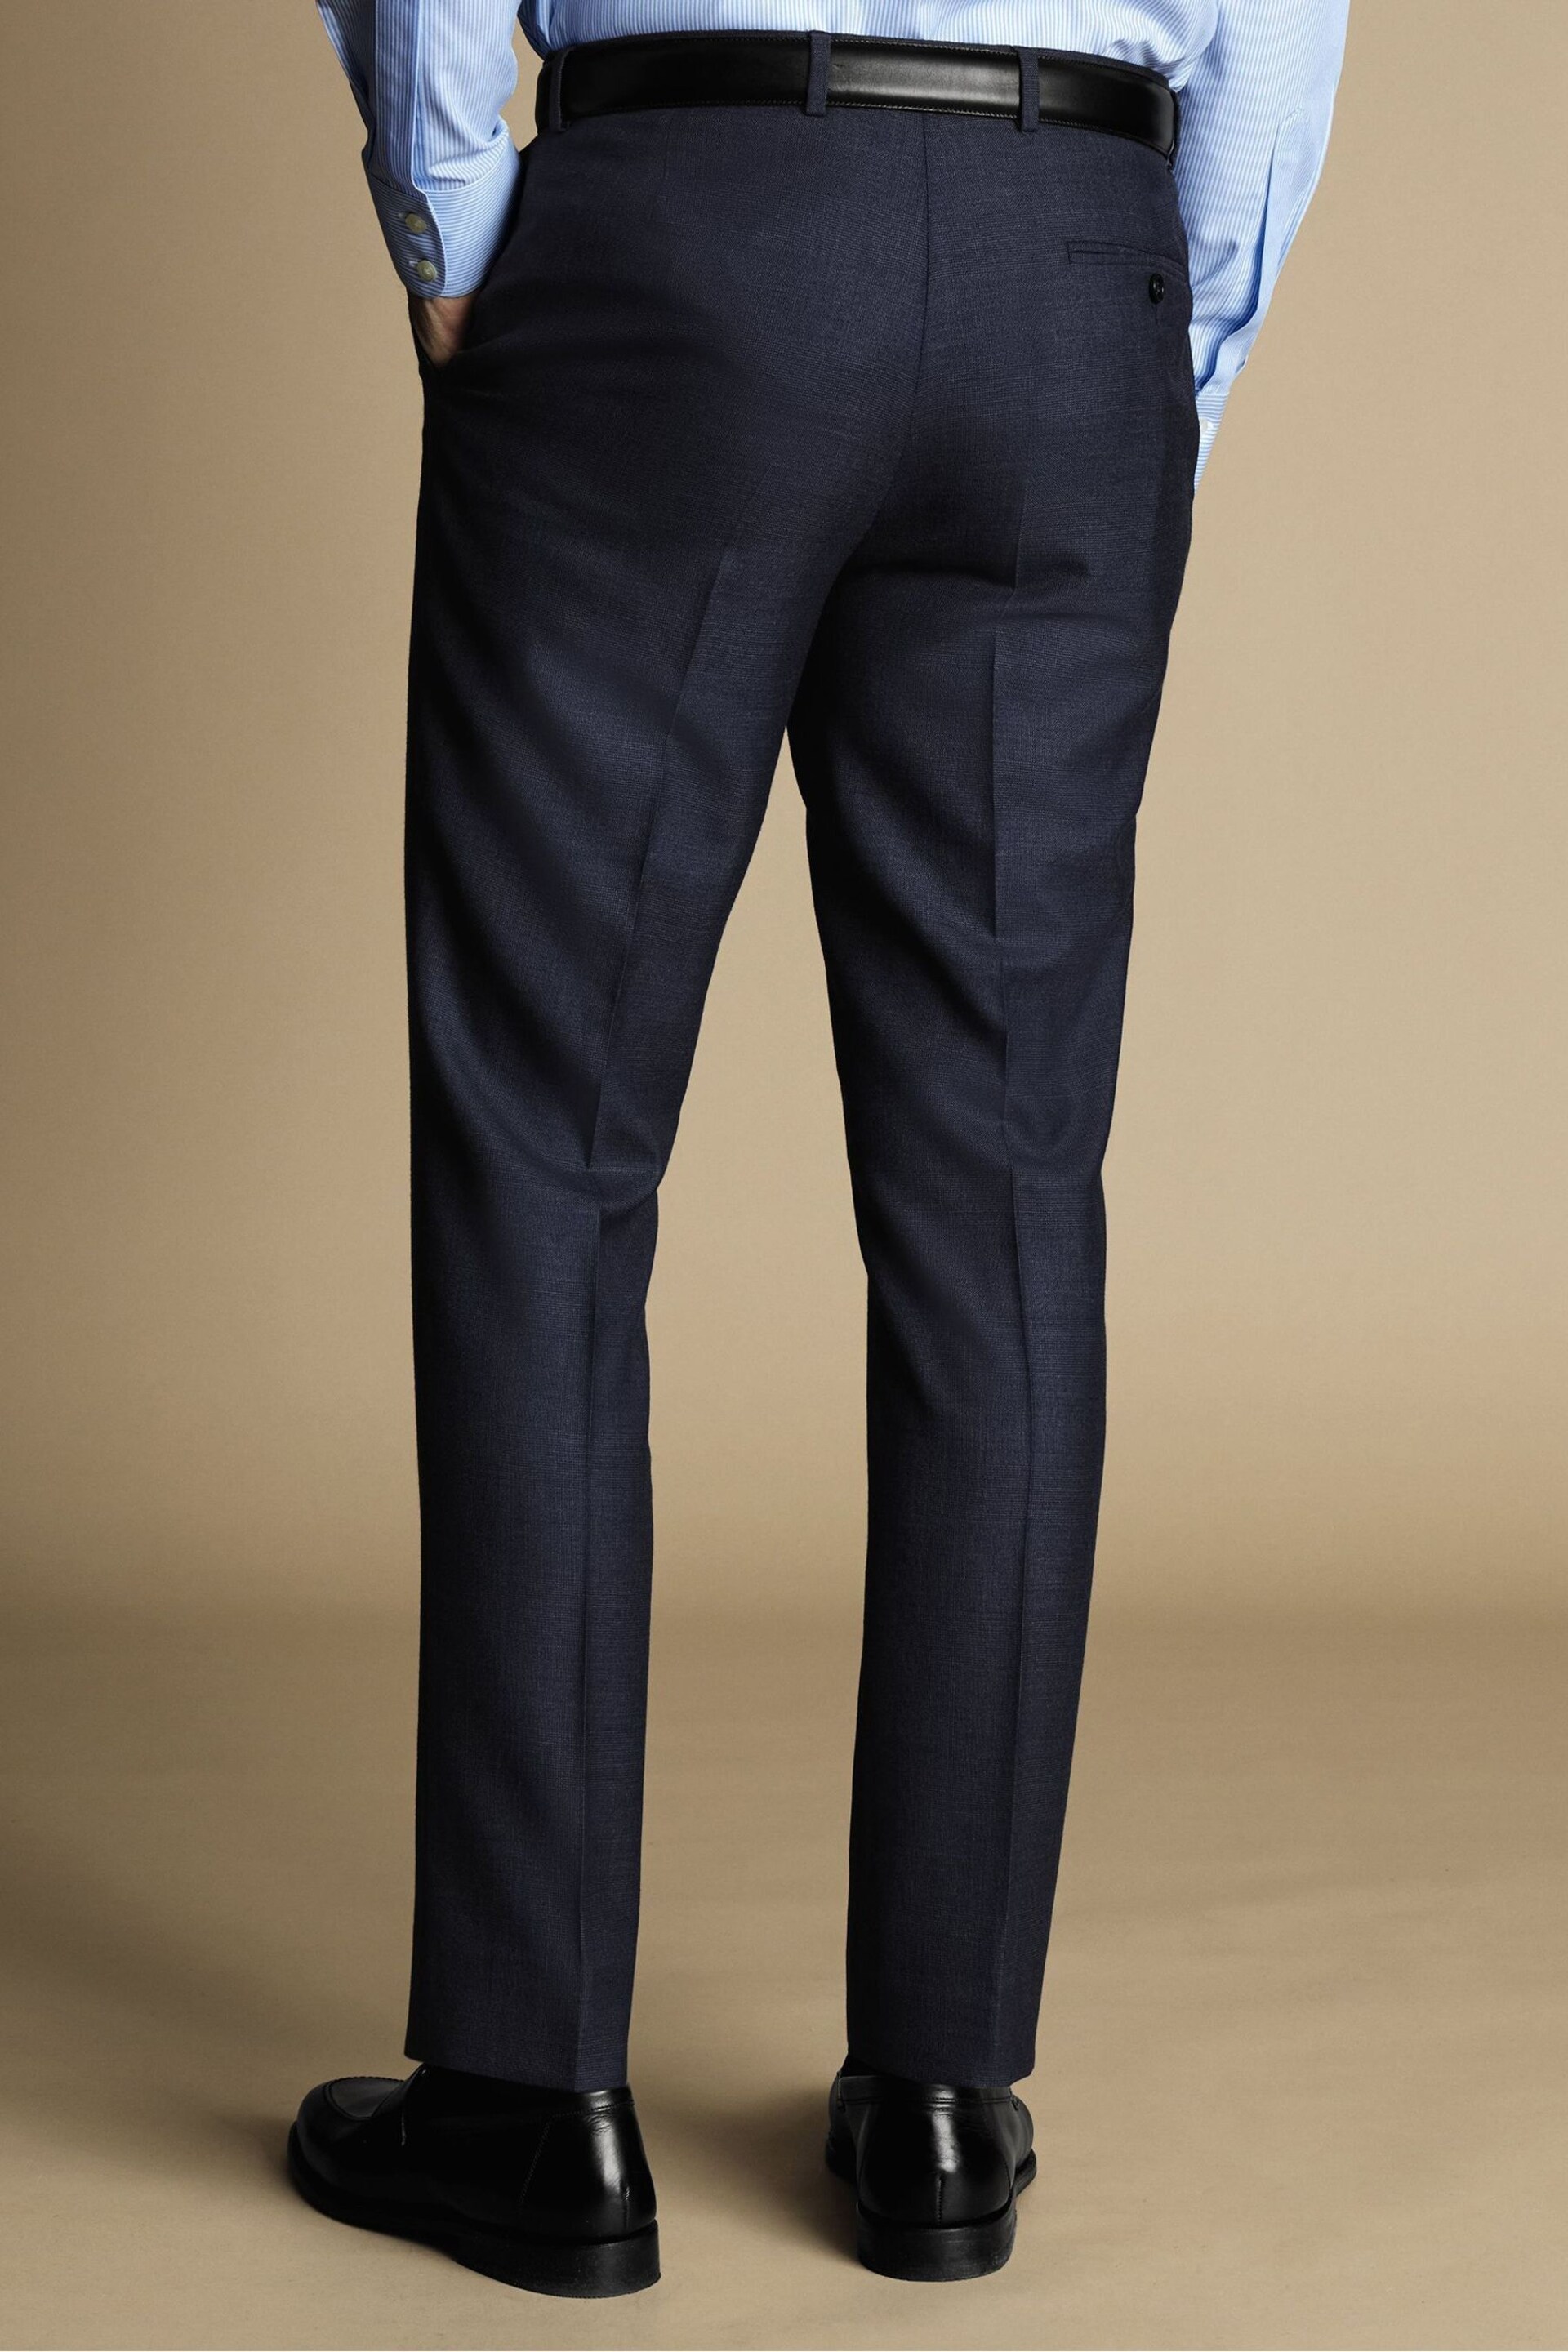 Charles Tyrwhitt Blue Heather  Prince Of Wales Slim Fit Suit Trousers - Image 2 of 3